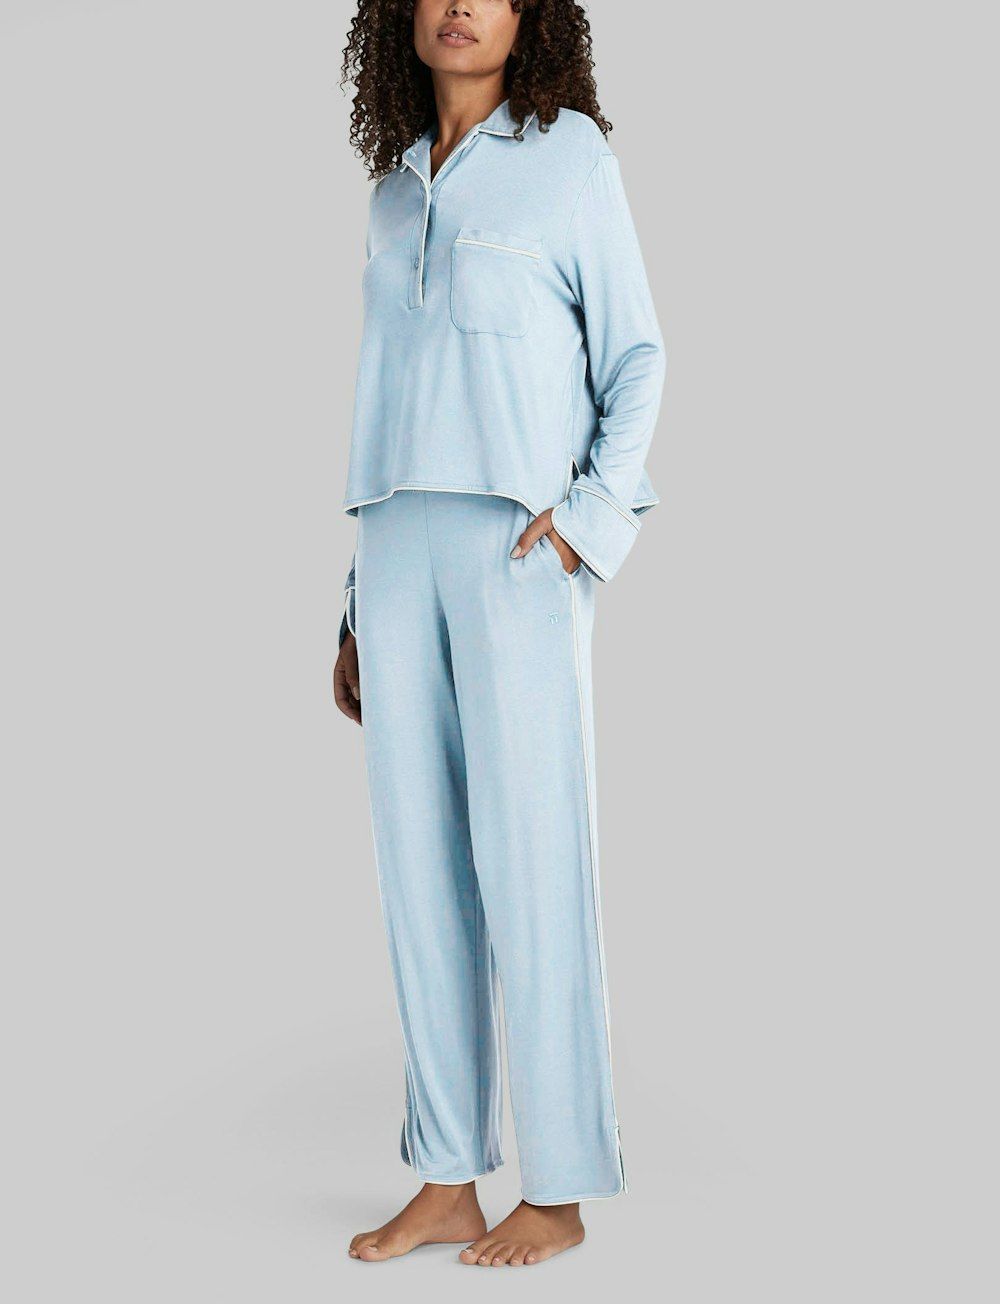 Women's Downtime Pullover Long Sleeve Pajama Top & Pant Set | Tommy John